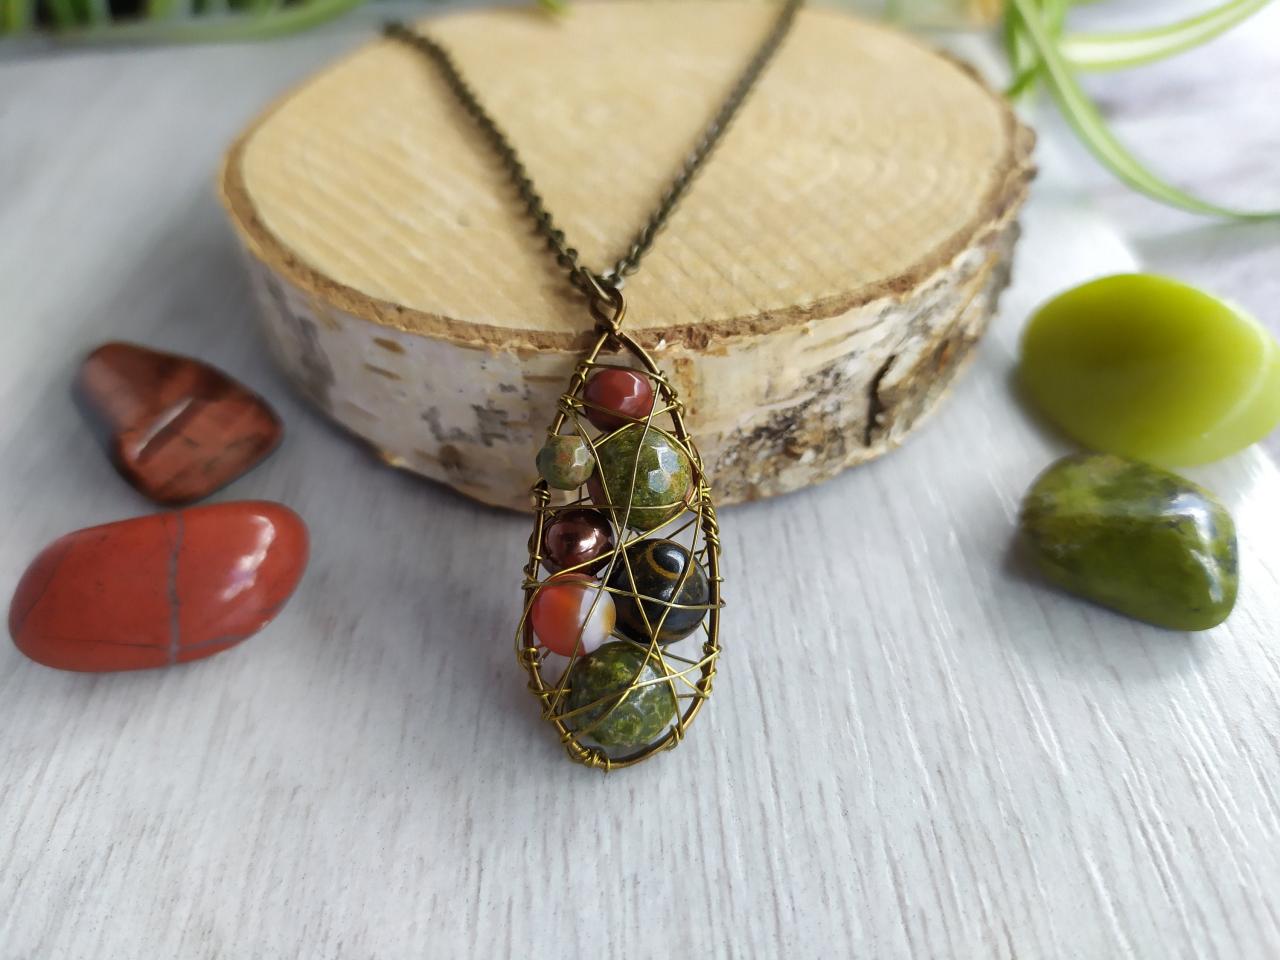 Brown Green Mixed Gemstone Necklace, Unakite, Agate, Mookaite, Tigers Eye Necklace, Nature Inspired Wire Wrapped Bohemian Pendant.